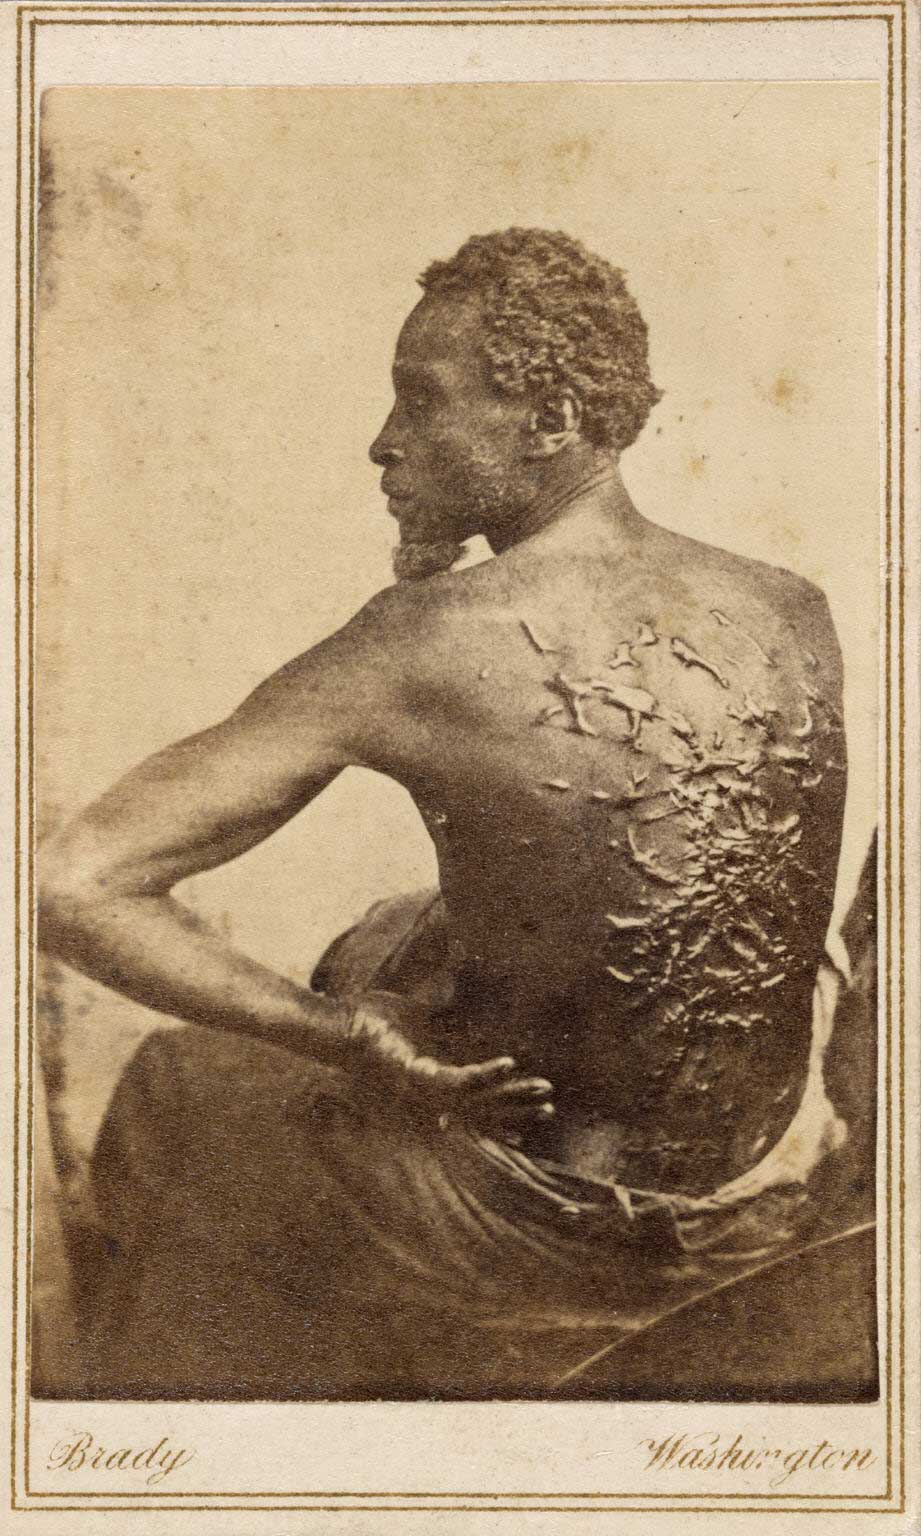 Photograph of a man's badly scarred back